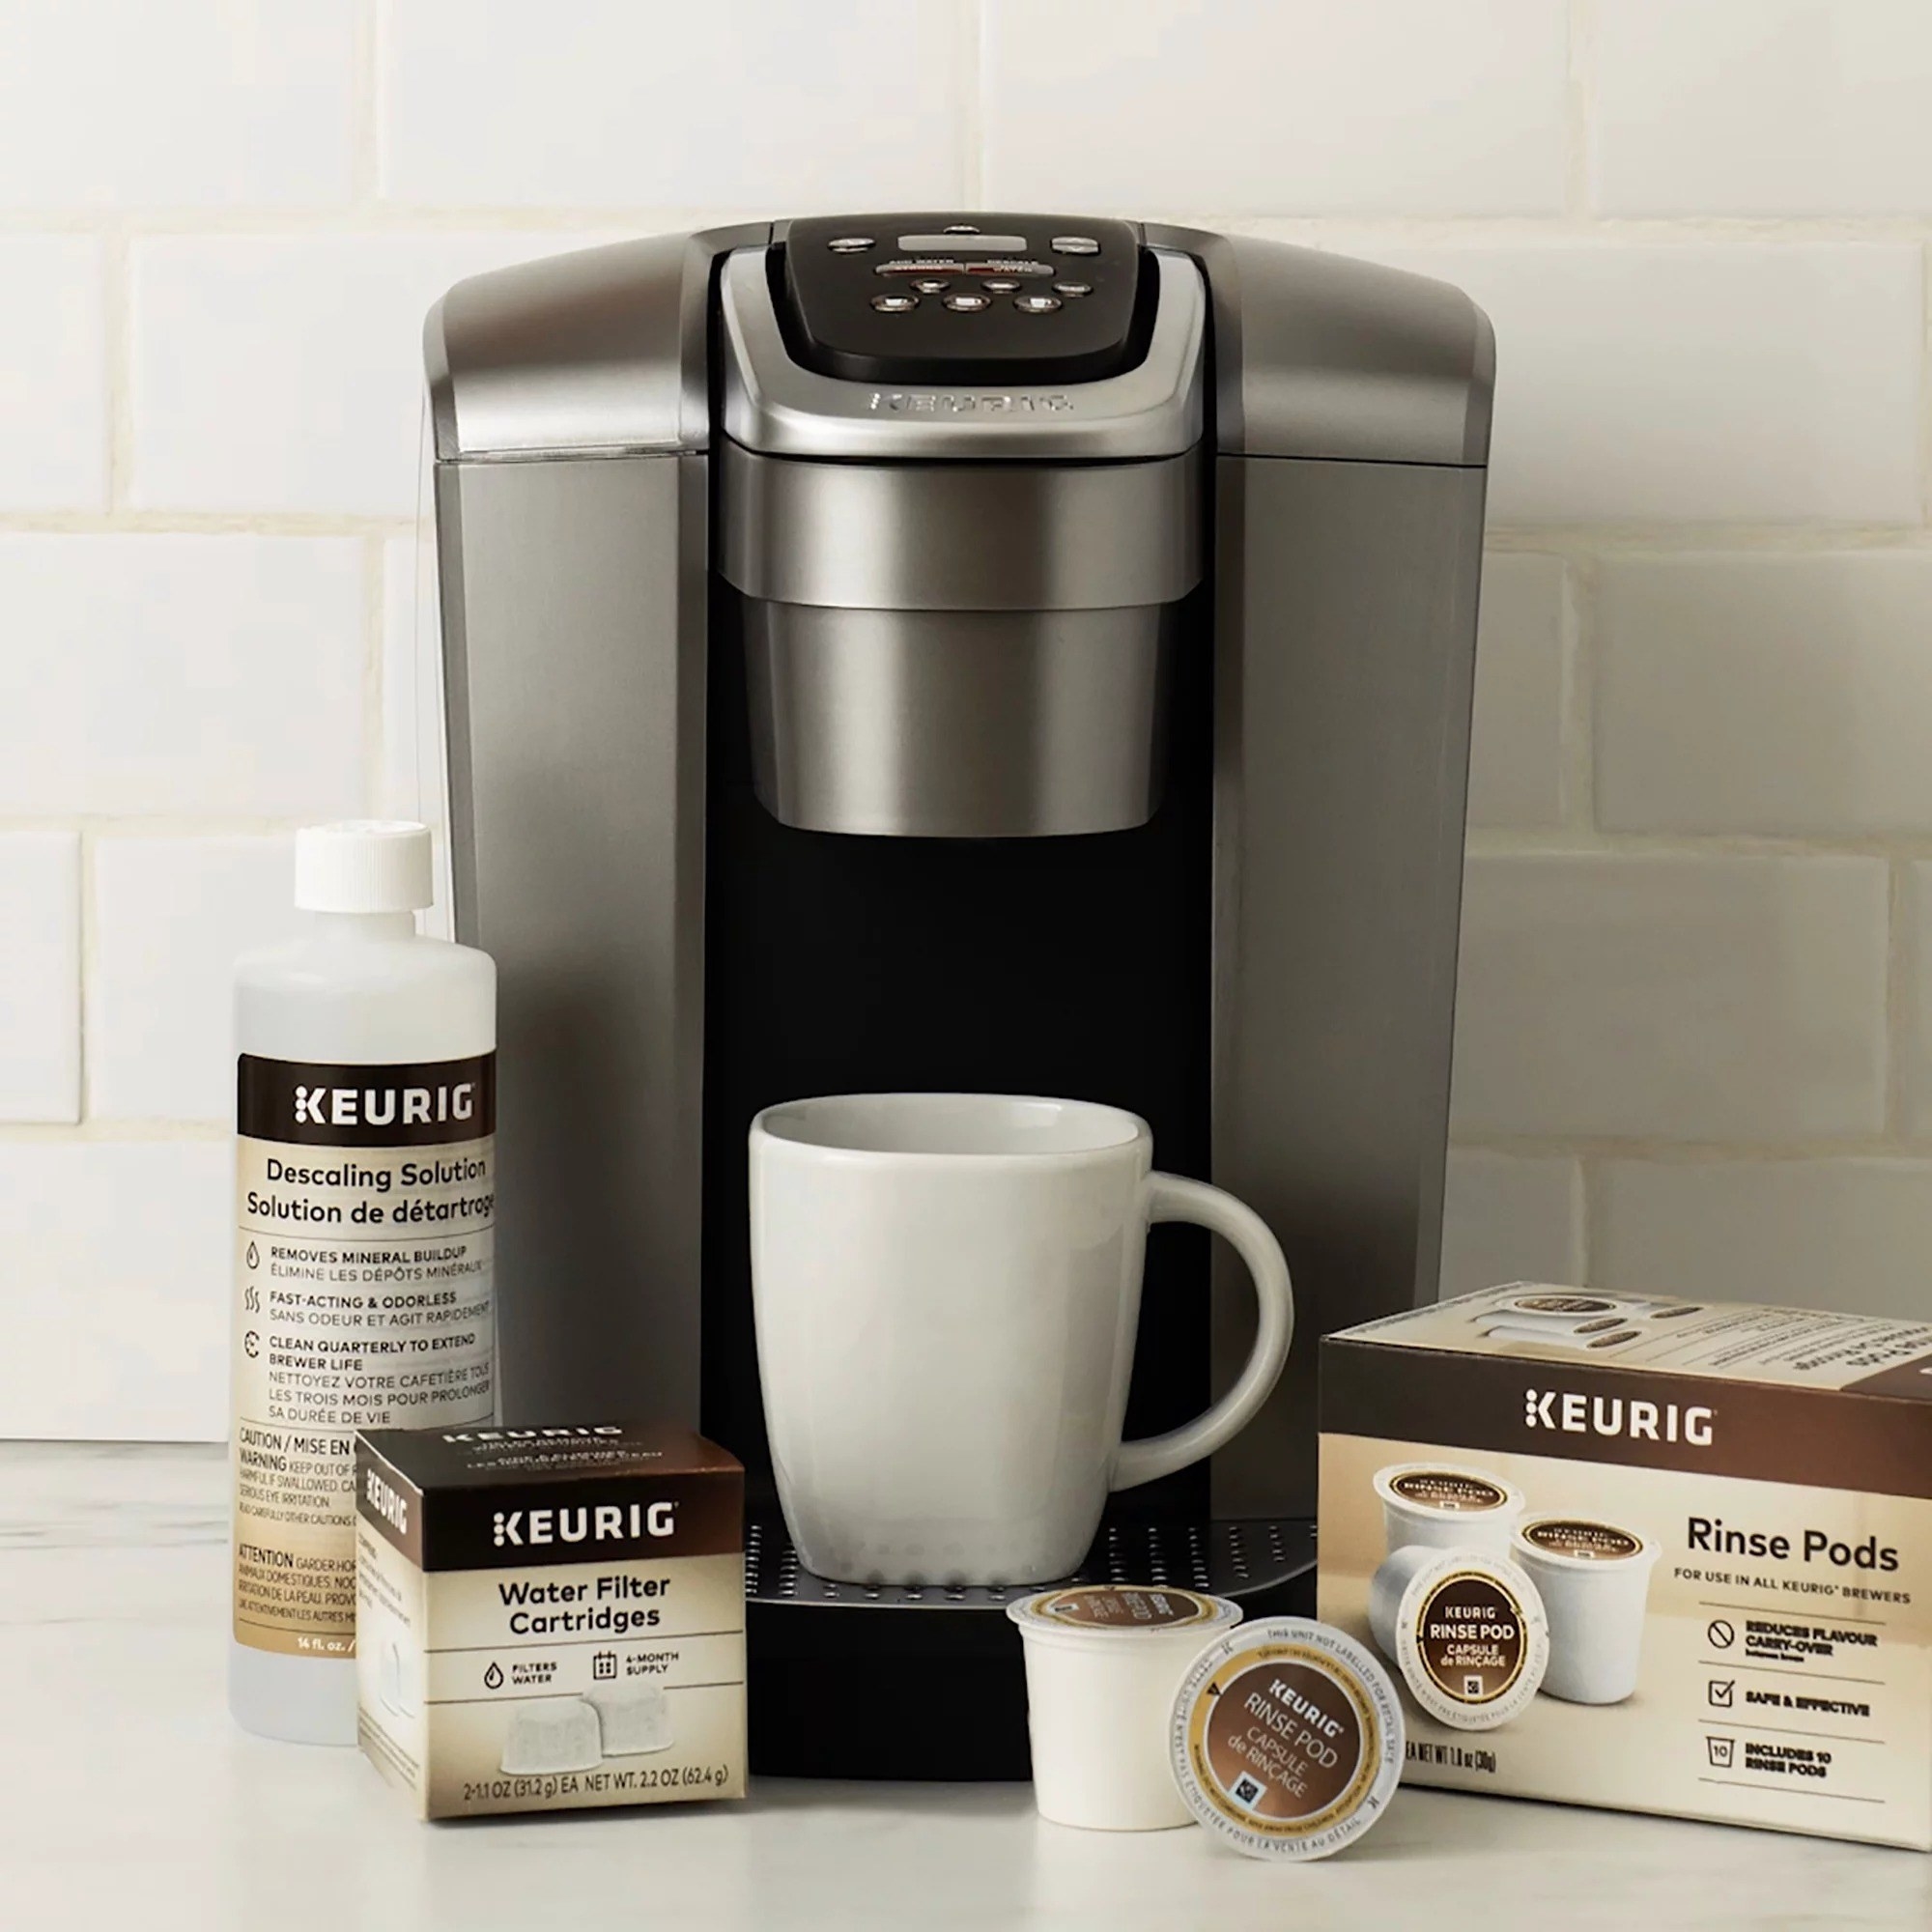 The Keurig descaling solution in front of a keurig machine